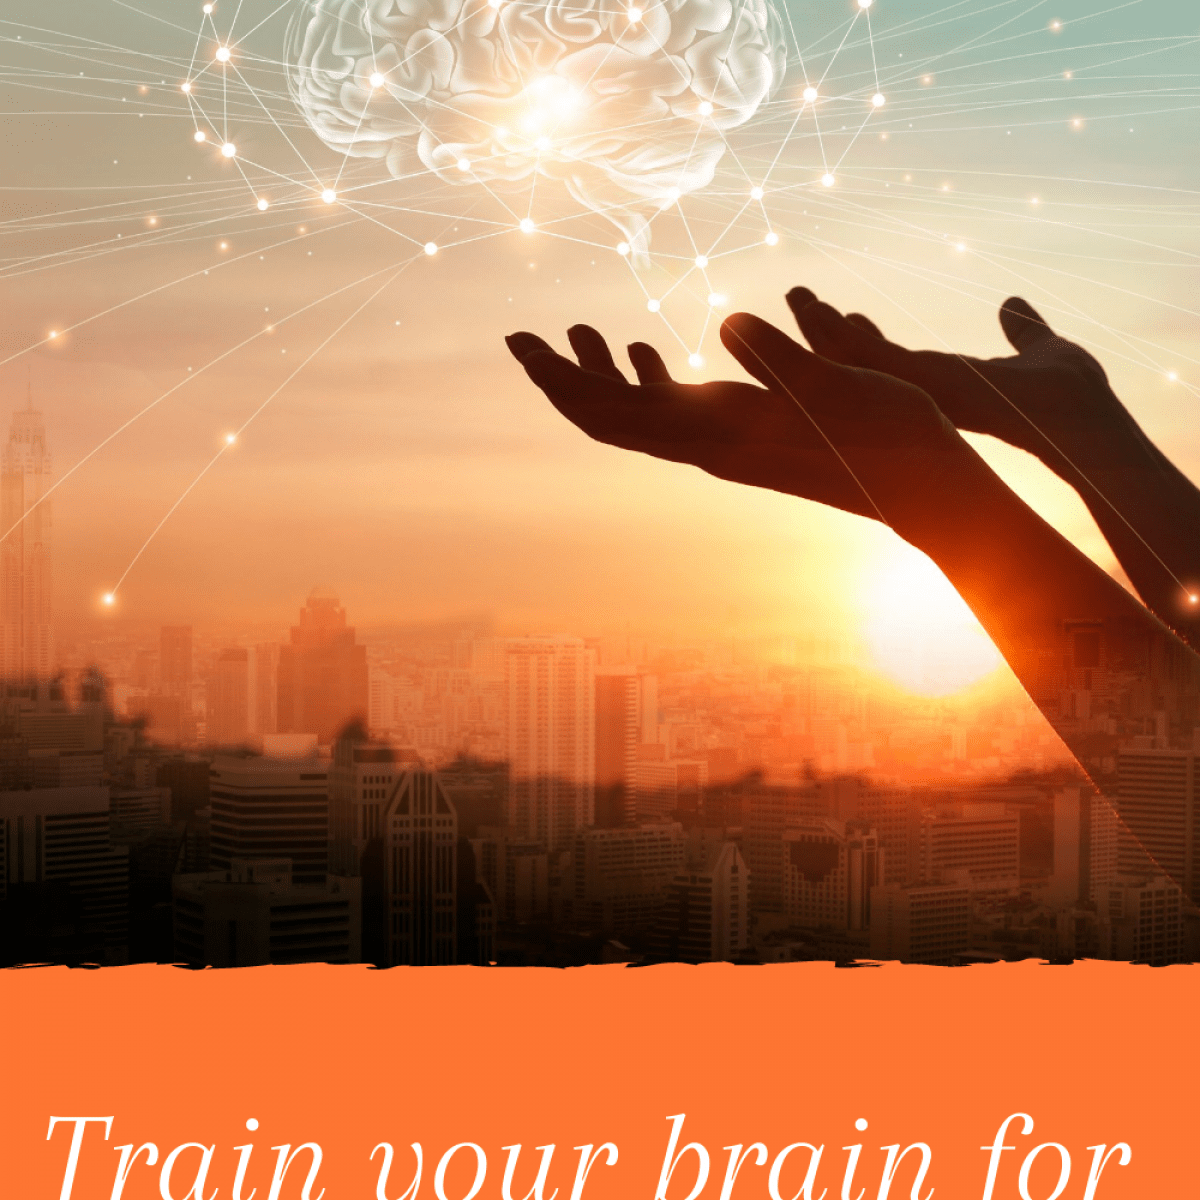 Train your brain for direct sales success